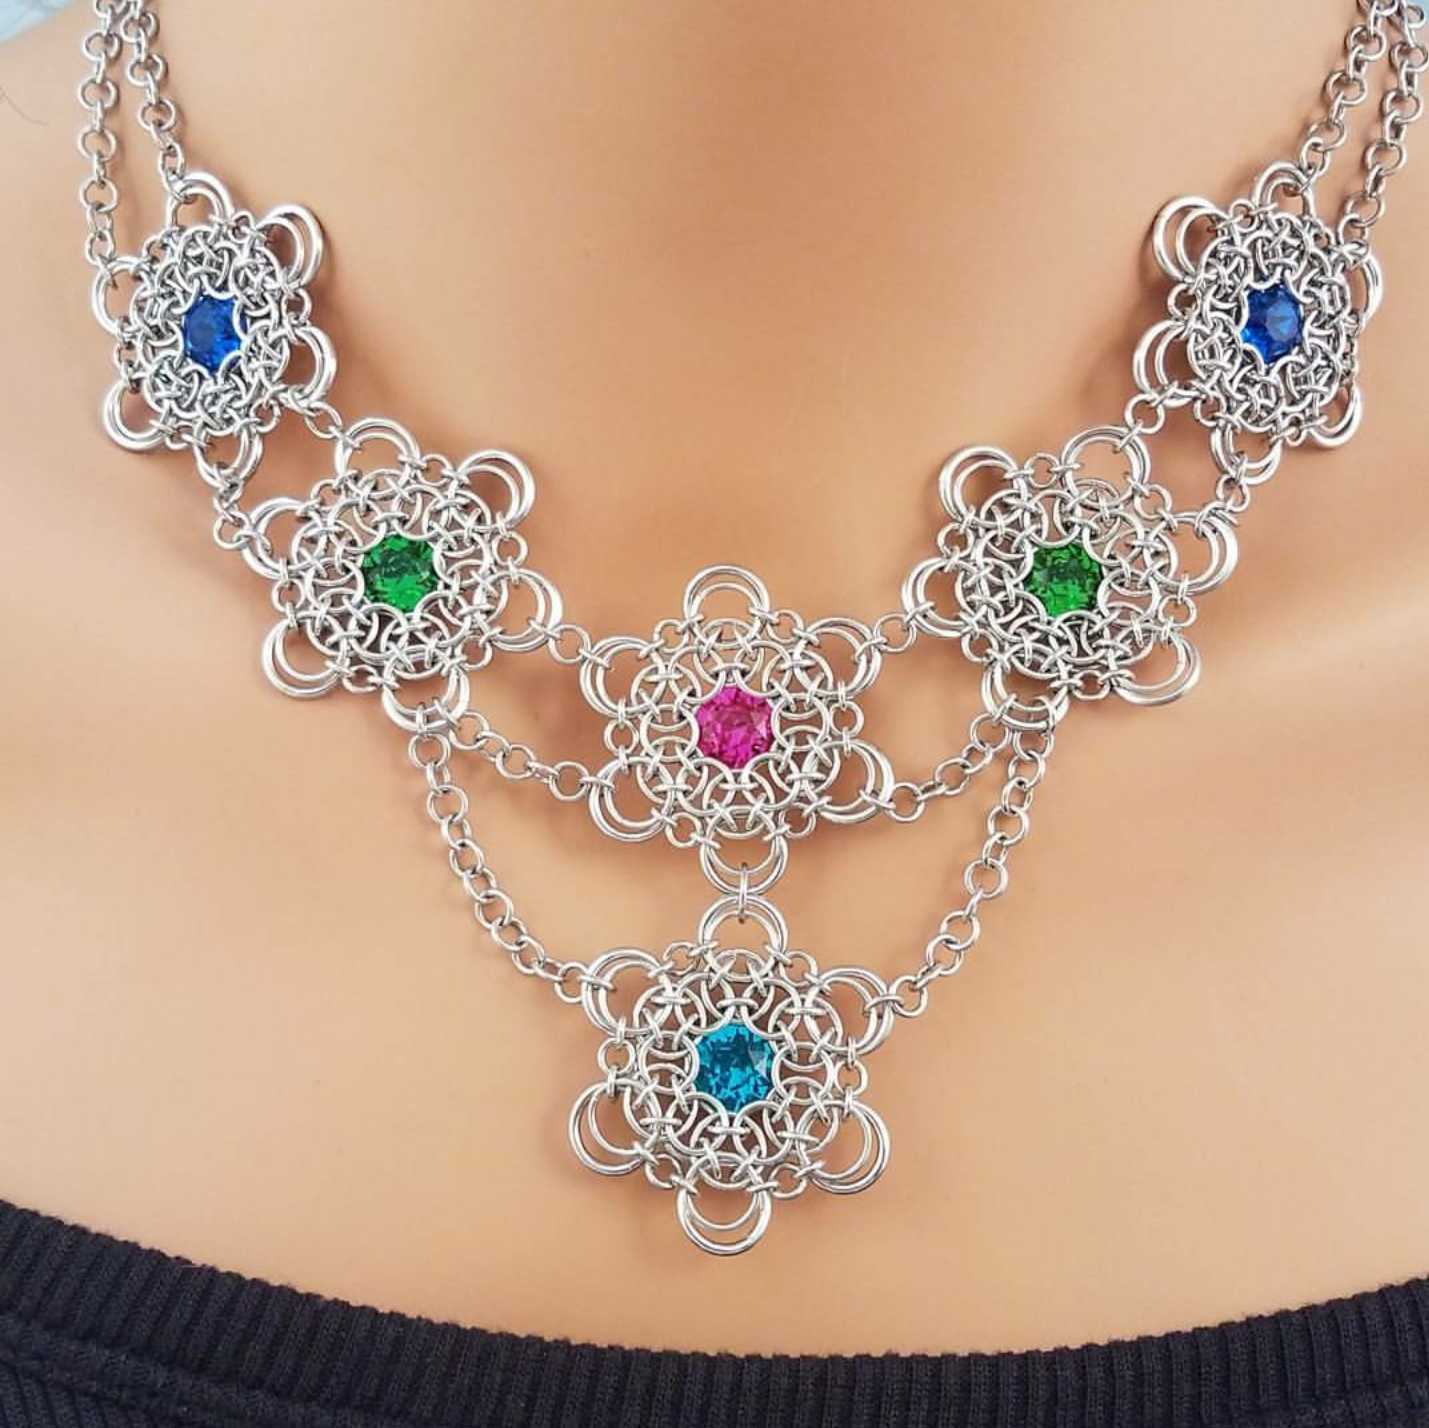 aluminum necklace with colorful stones in What's Up Buttercup weave by Lisa Ellis